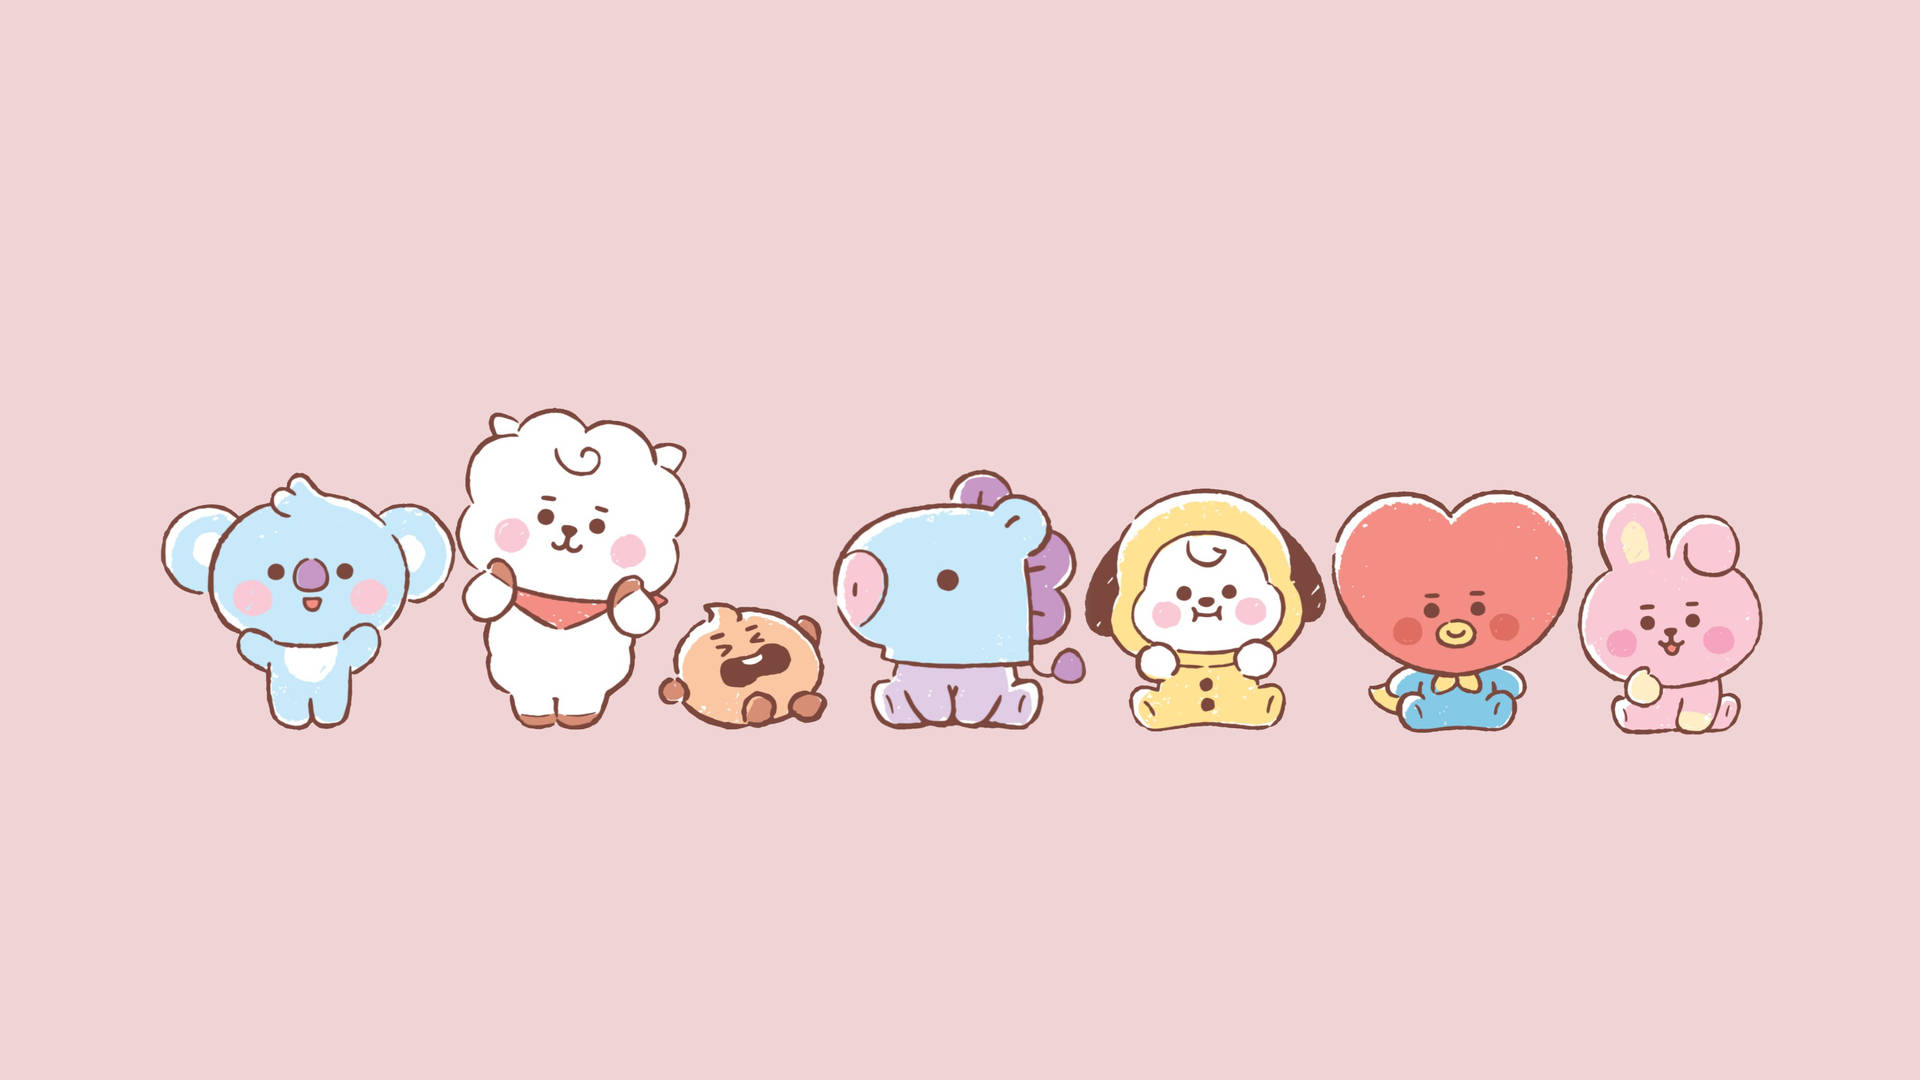 Bt21 Wallpaper Discover more 1080p Aesthetic Cute Desktop Iphone  wallpapers http  Bts wallpaper desktop Cute wallpaper for phone Free  wallpaper backgrounds